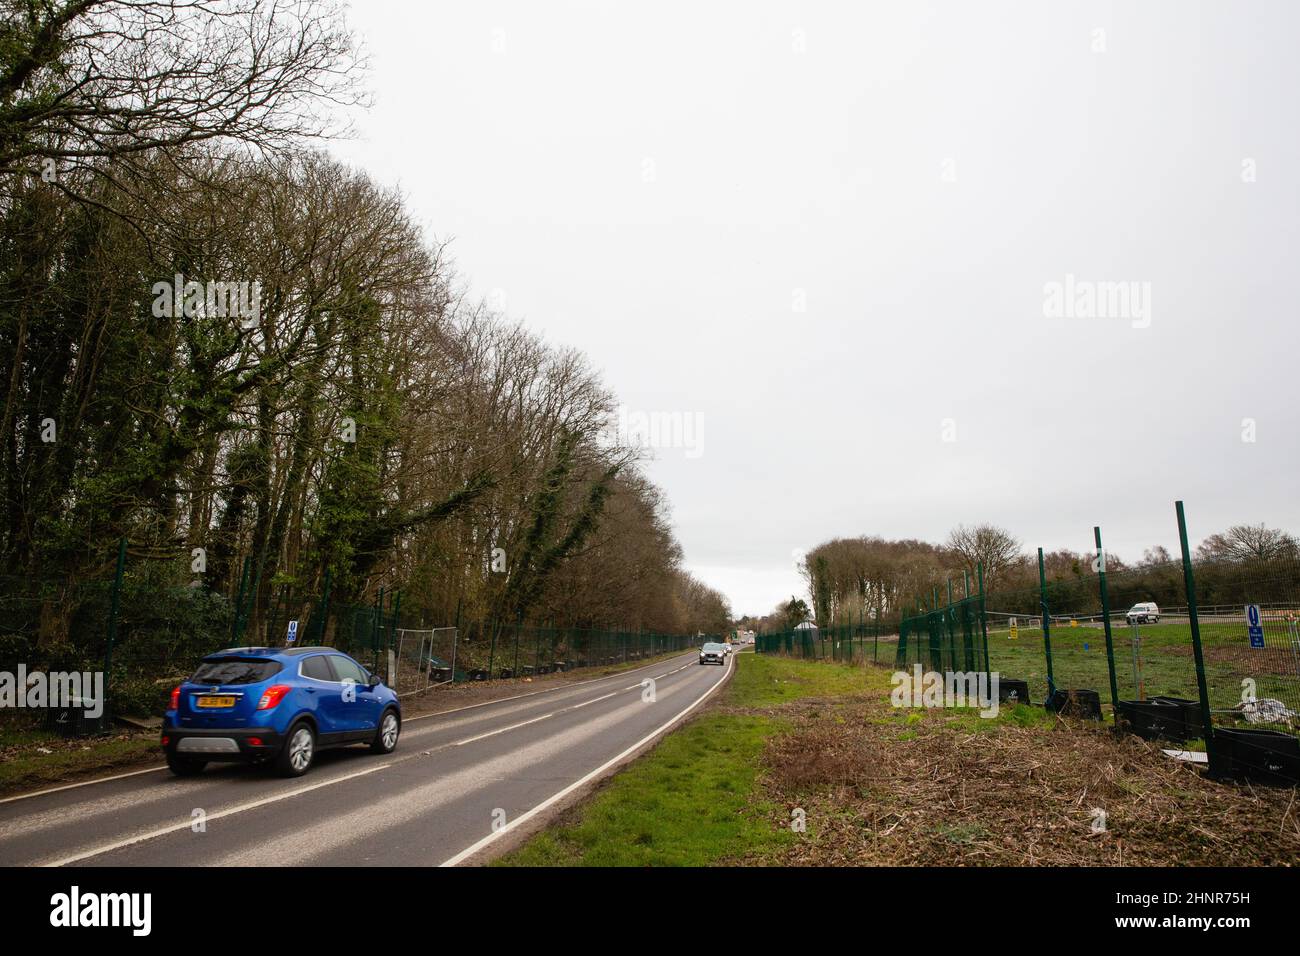 Wendover, UK. 9th February, 2022. Preparatory works for the HS2 high-speed rail link are pictured alongside the A413. HS2 will cross the A413 by means of the Small Dean viaduct. Credit: Mark Kerrison/Alamy Live News Stock Photo